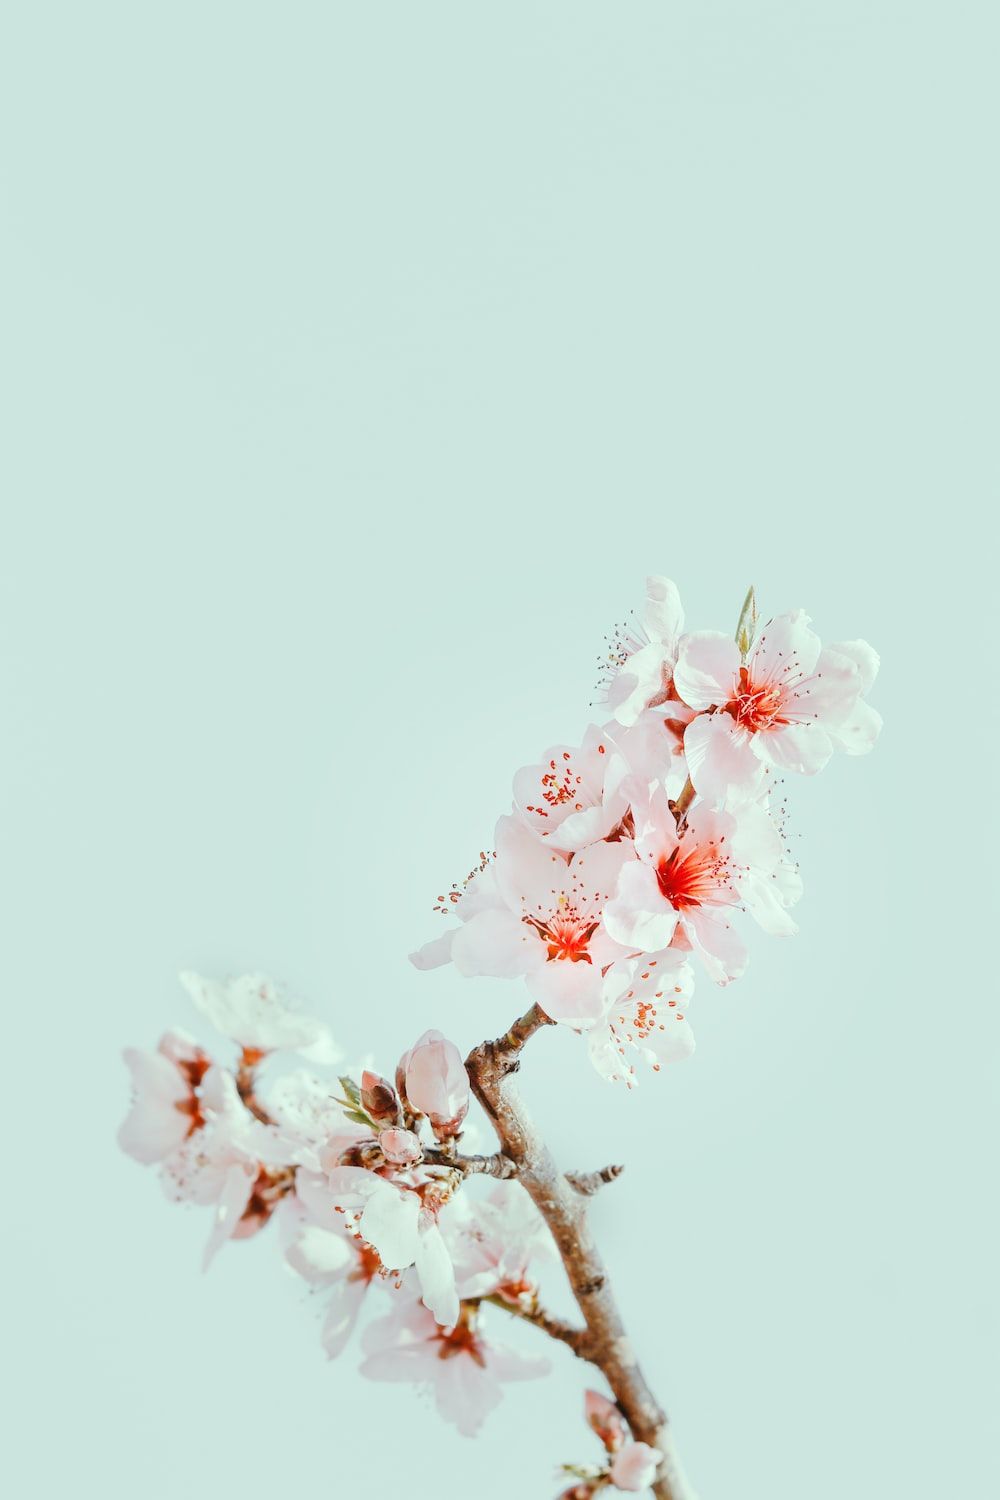 A branch with pink flowers on it - Cherry blossom